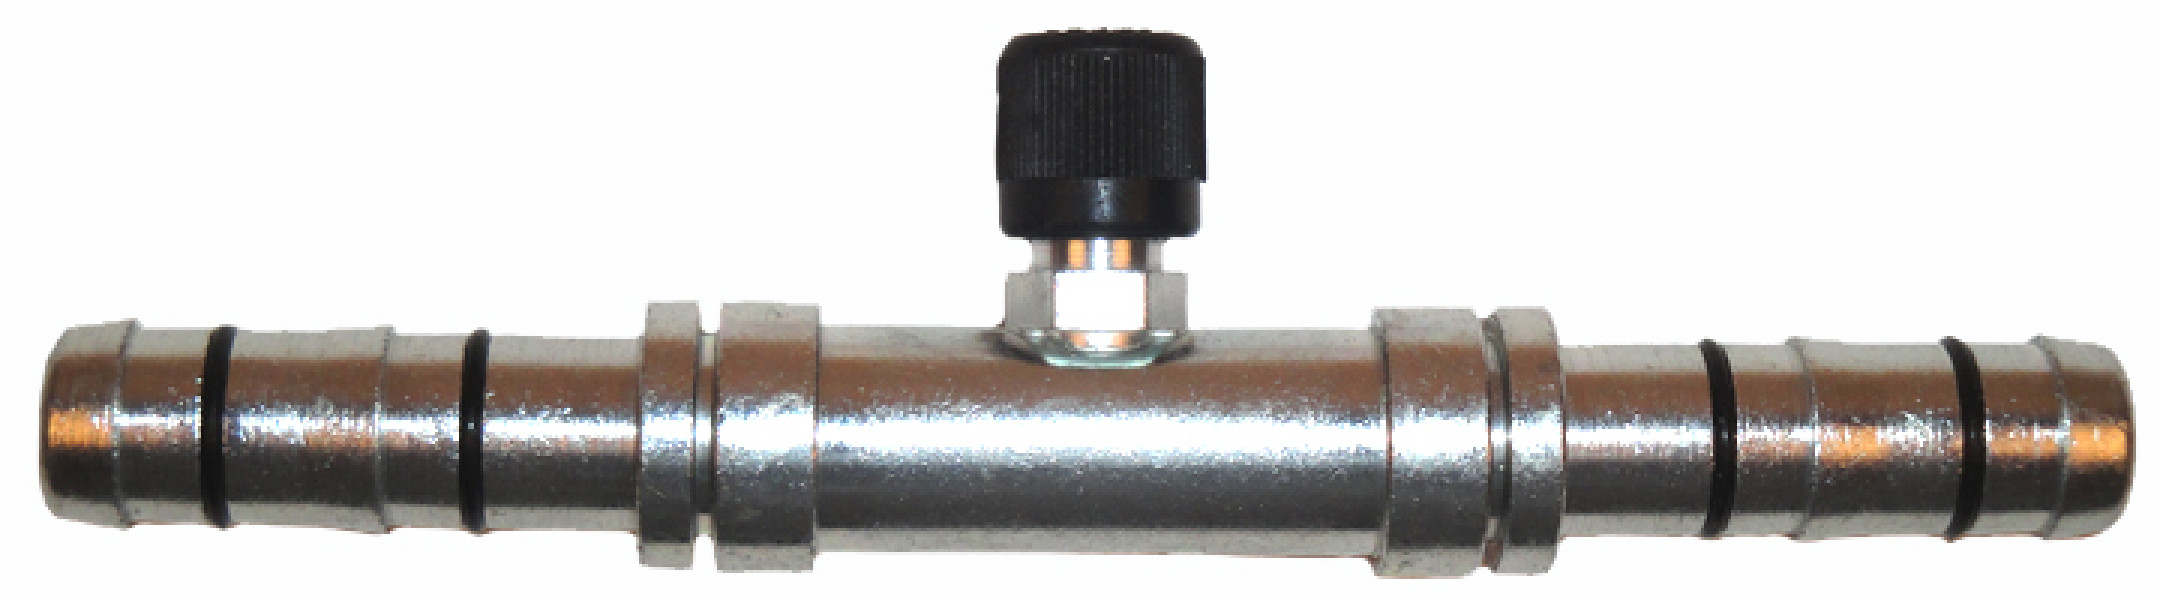 Image of A/C Refrigerant Hose Fitting from Sunair. Part number: FJ3171-1010S